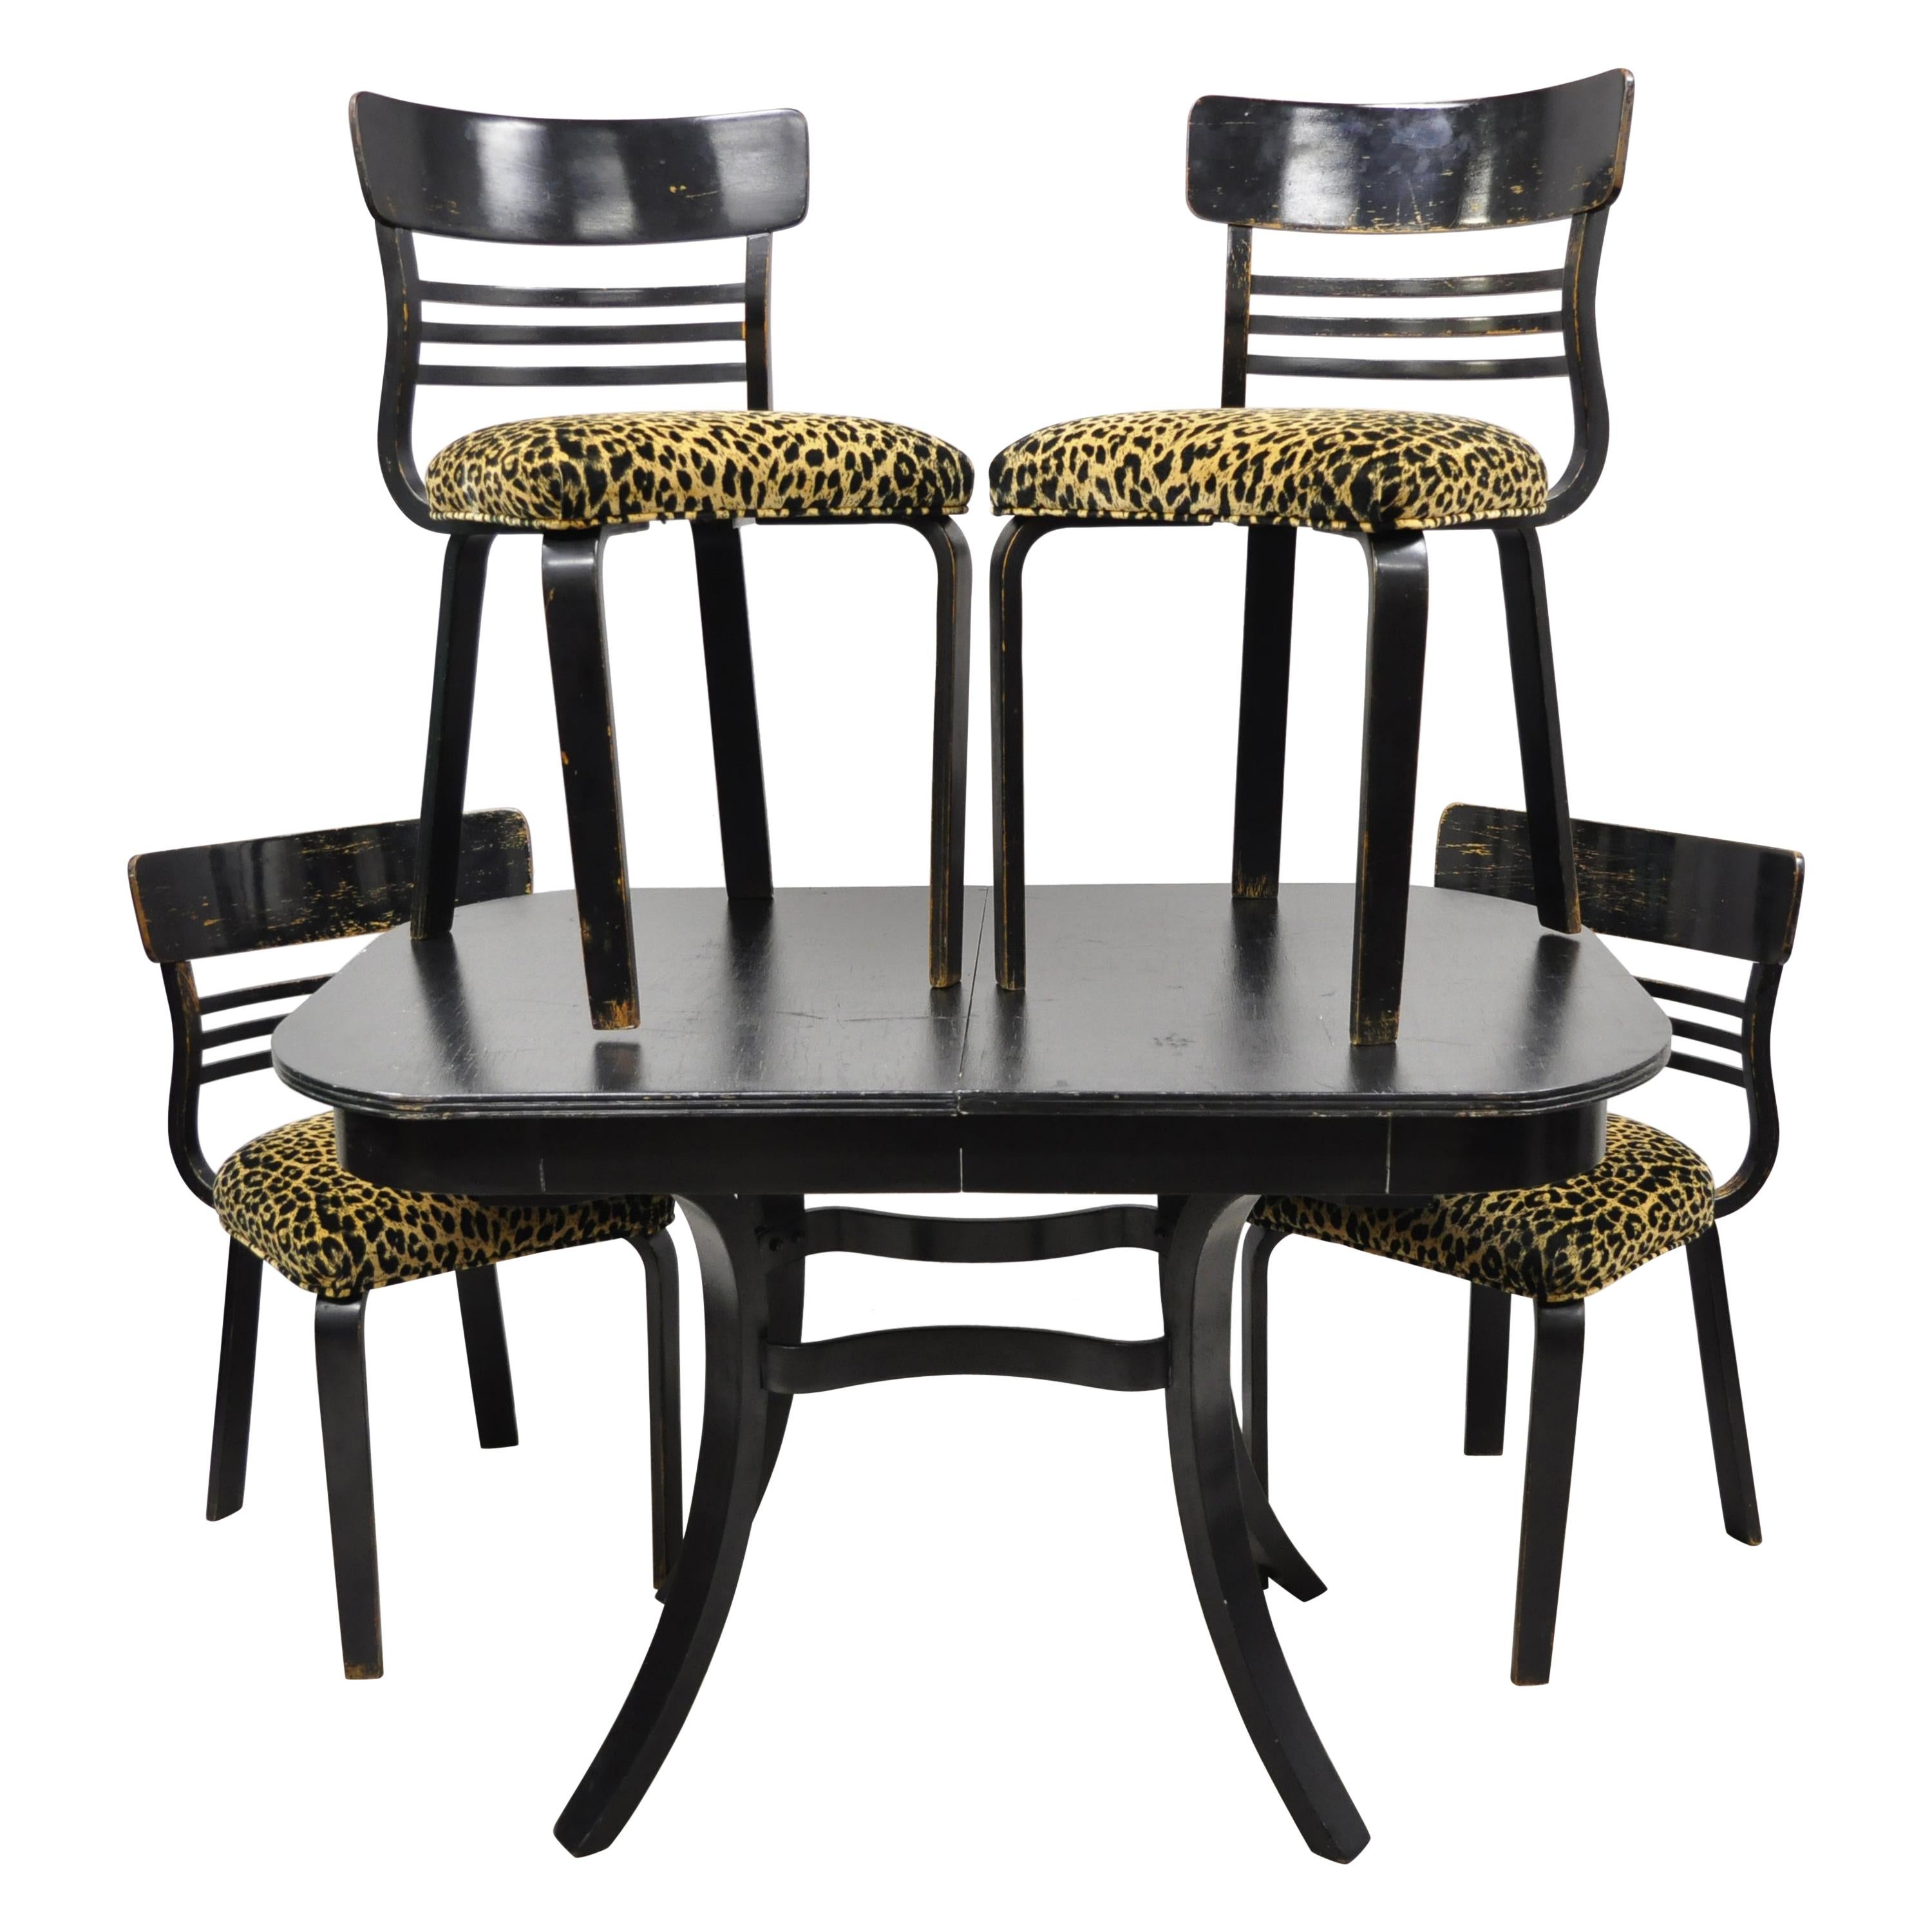 Austrian Thonet Bentwood Black Distressed Dining Set Table 4 Chairs, 5 Pieces